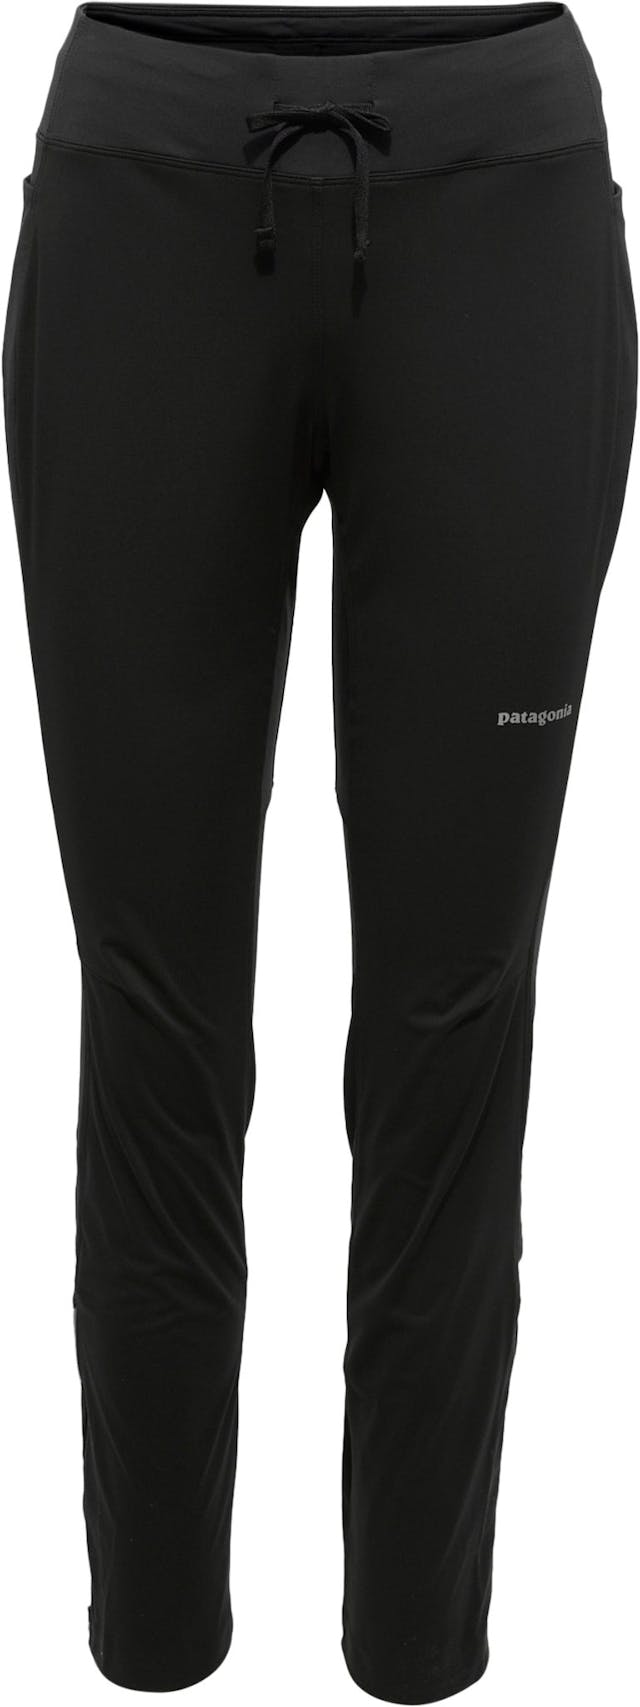 Product image for Wind Shield Pants - Women's